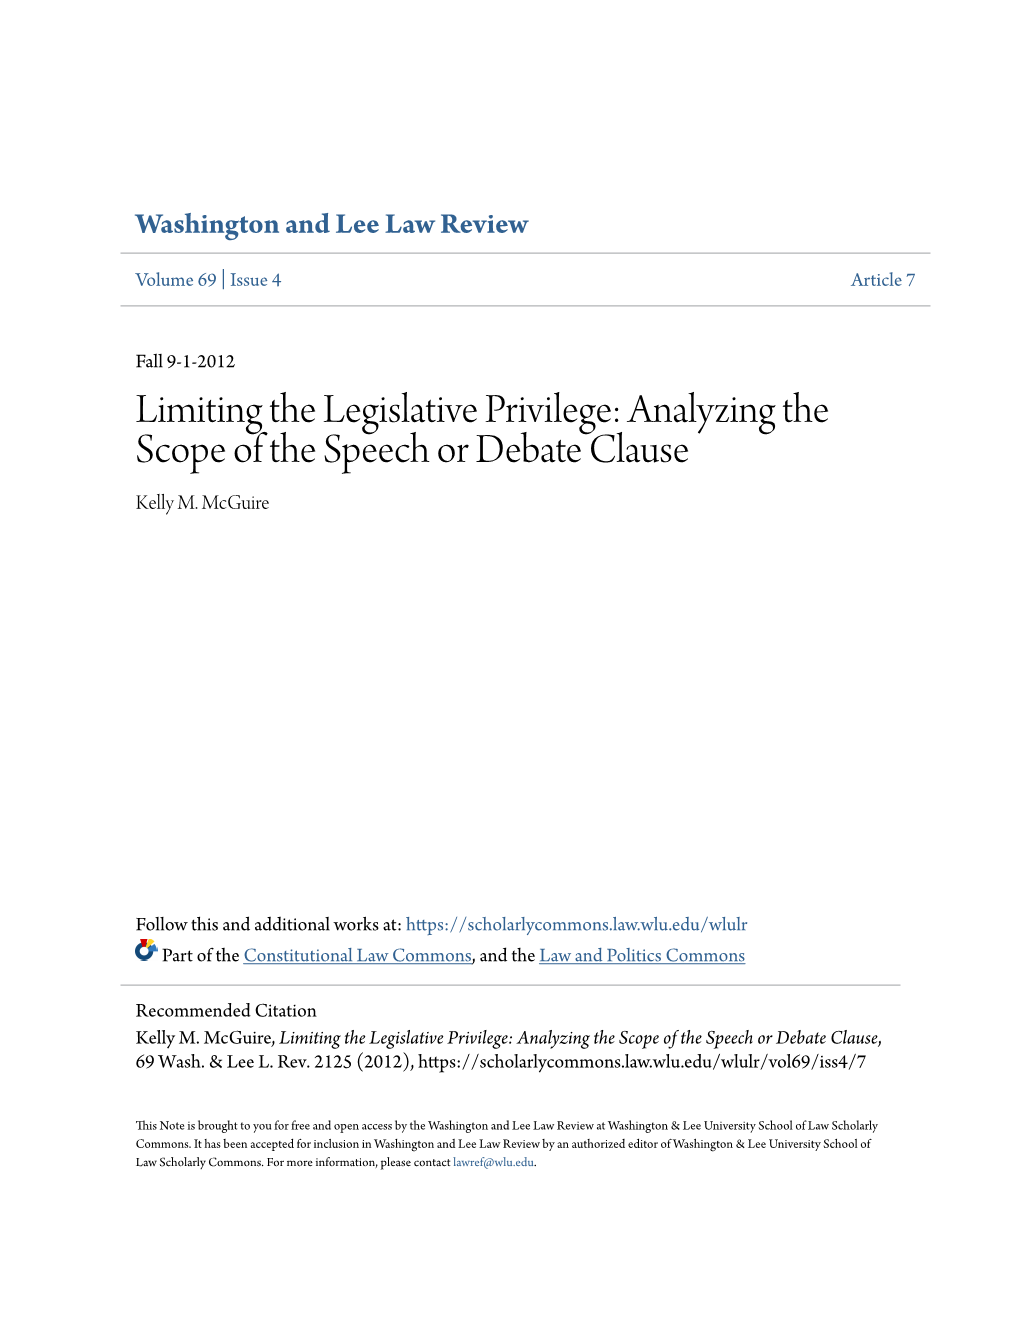 Limiting the Legislative Privilege: Analyzing the Scope of the Speech Or Debate Clause Kelly M